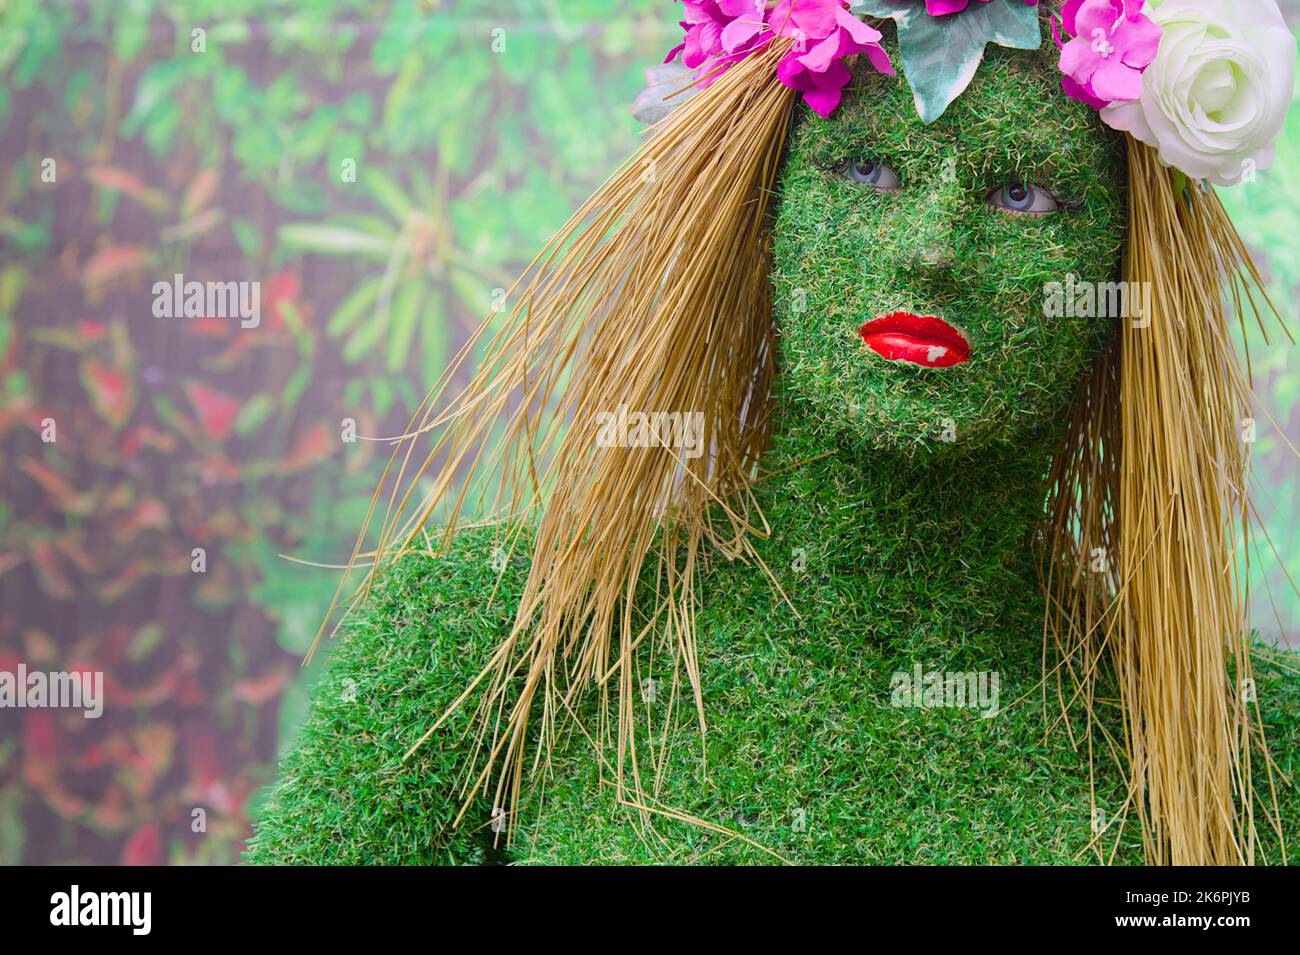 Mannequin Covered In Fake Plastic Grass With Straw Hair And Flowers, Bournemouth UK Stock Photo